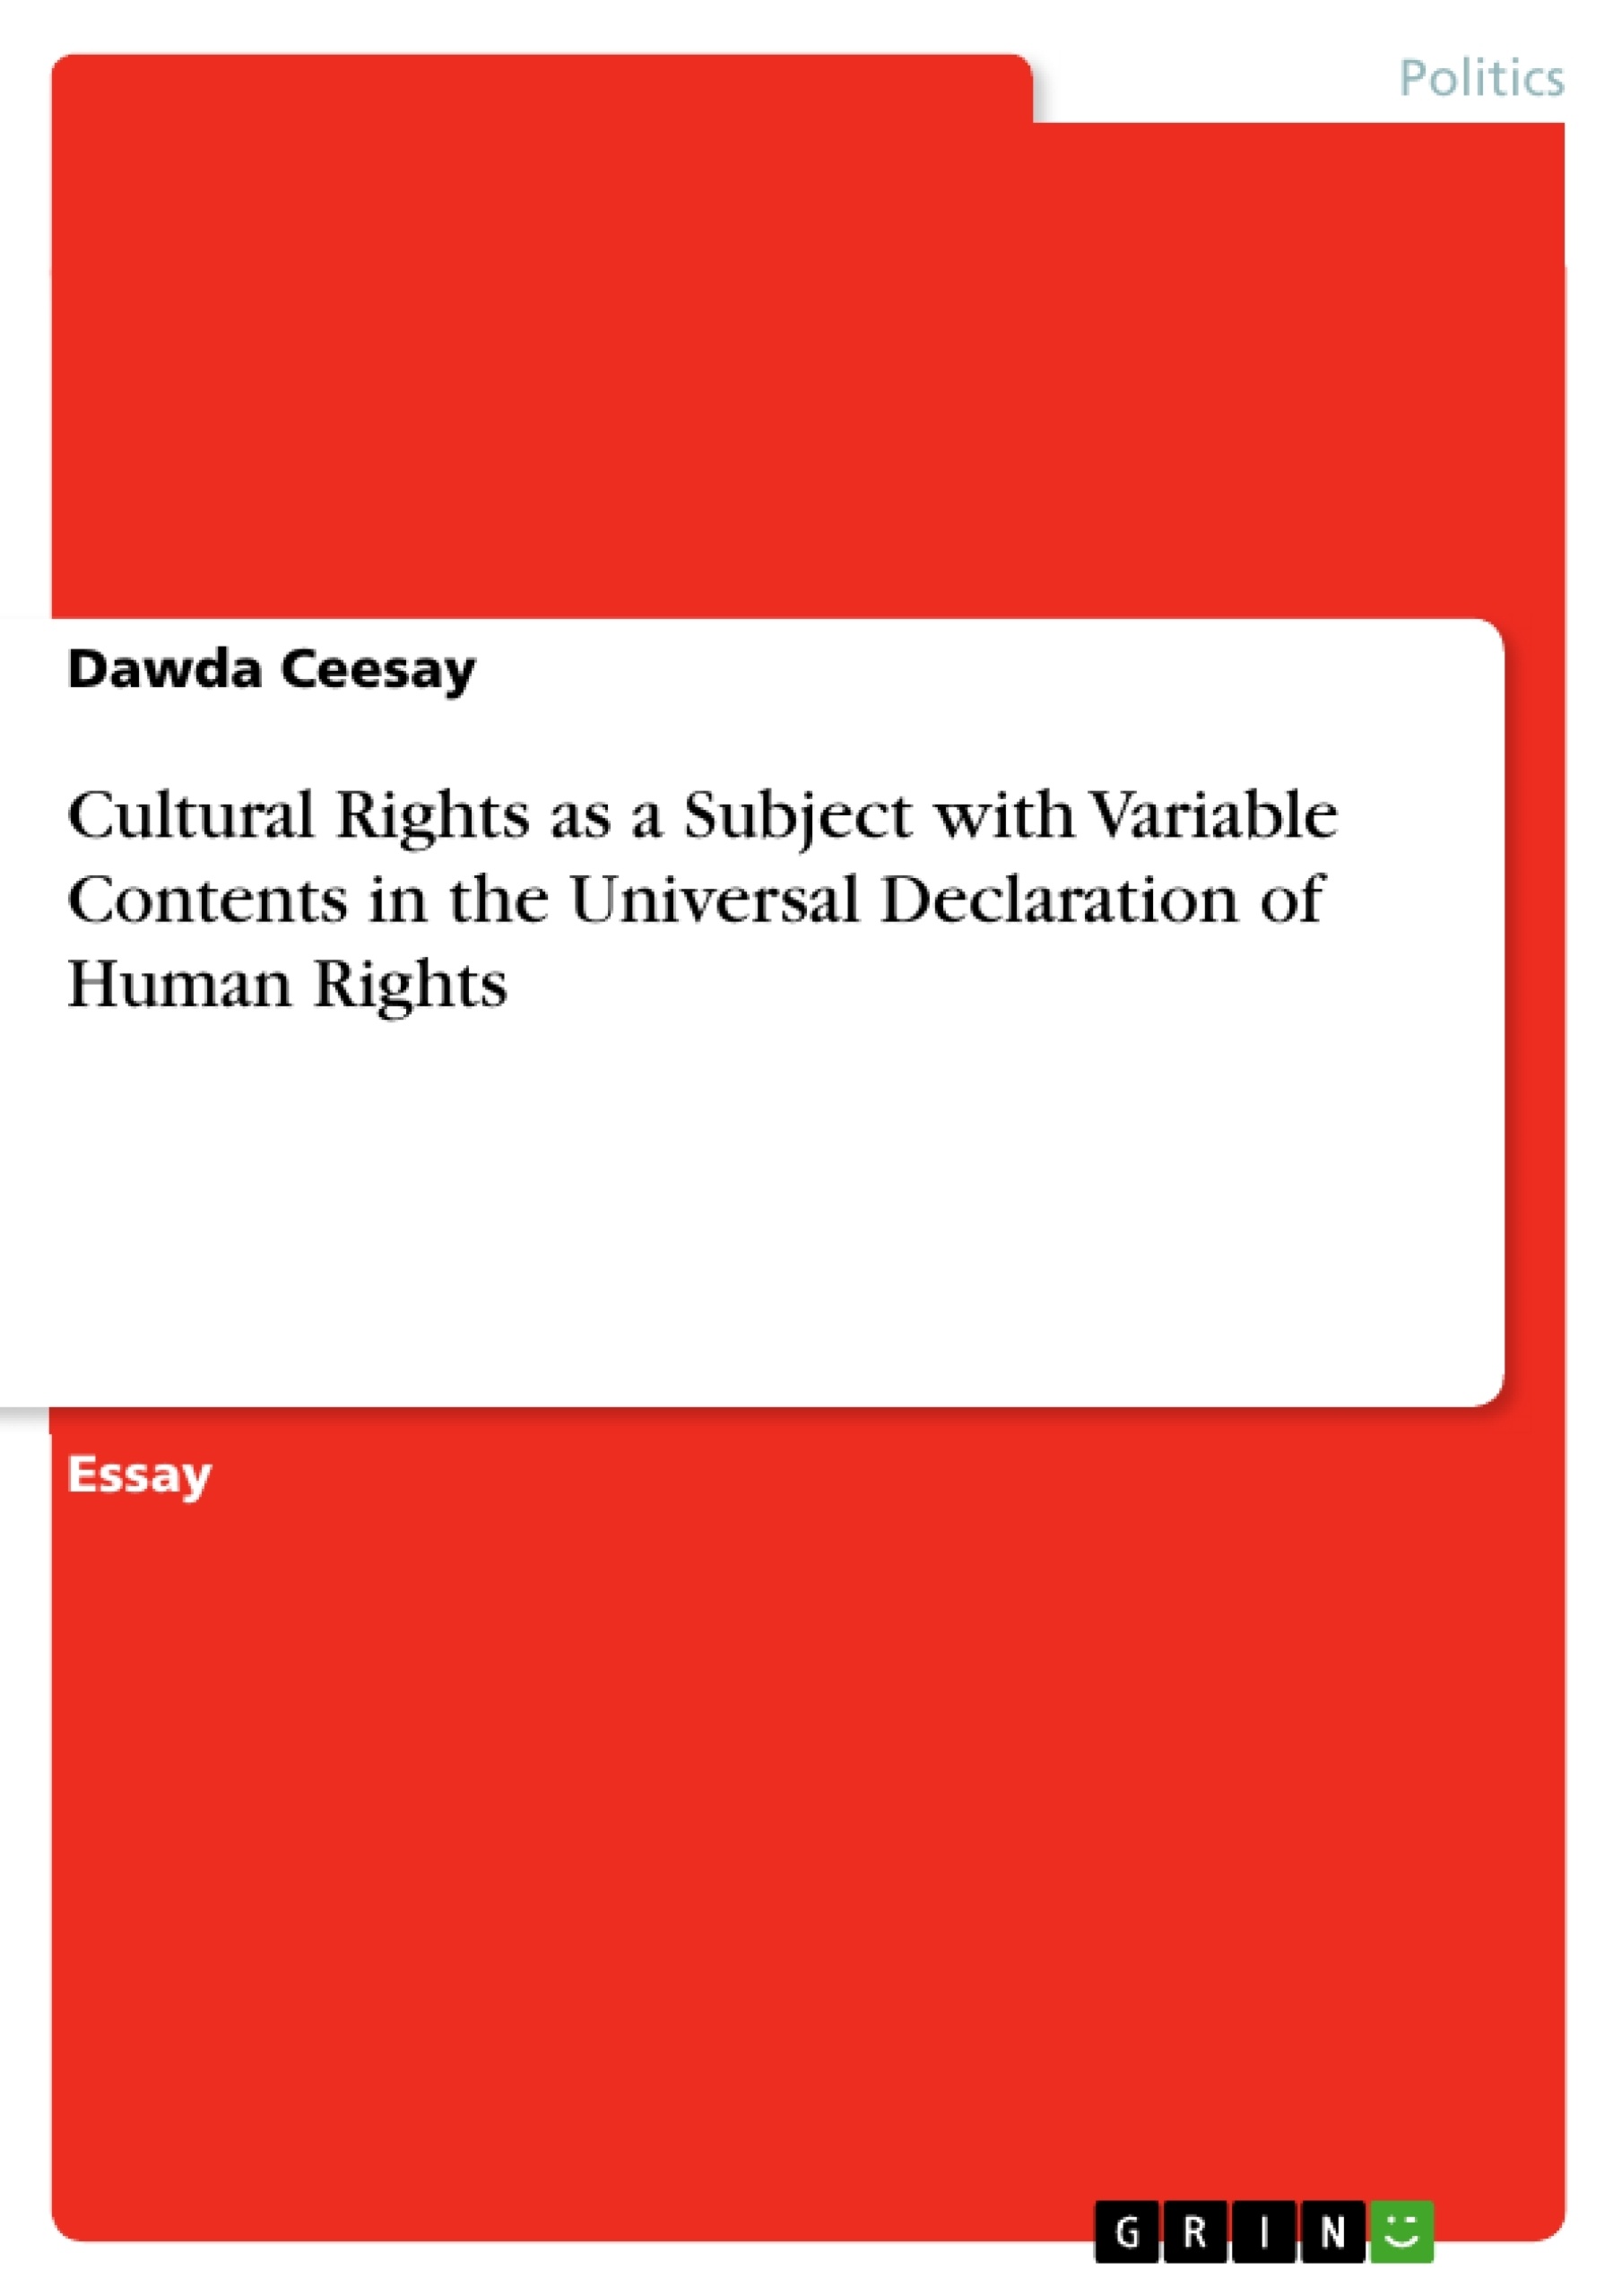 Title: Cultural Rights as a Subject with Variable Contents in the Universal Declaration of Human Rights